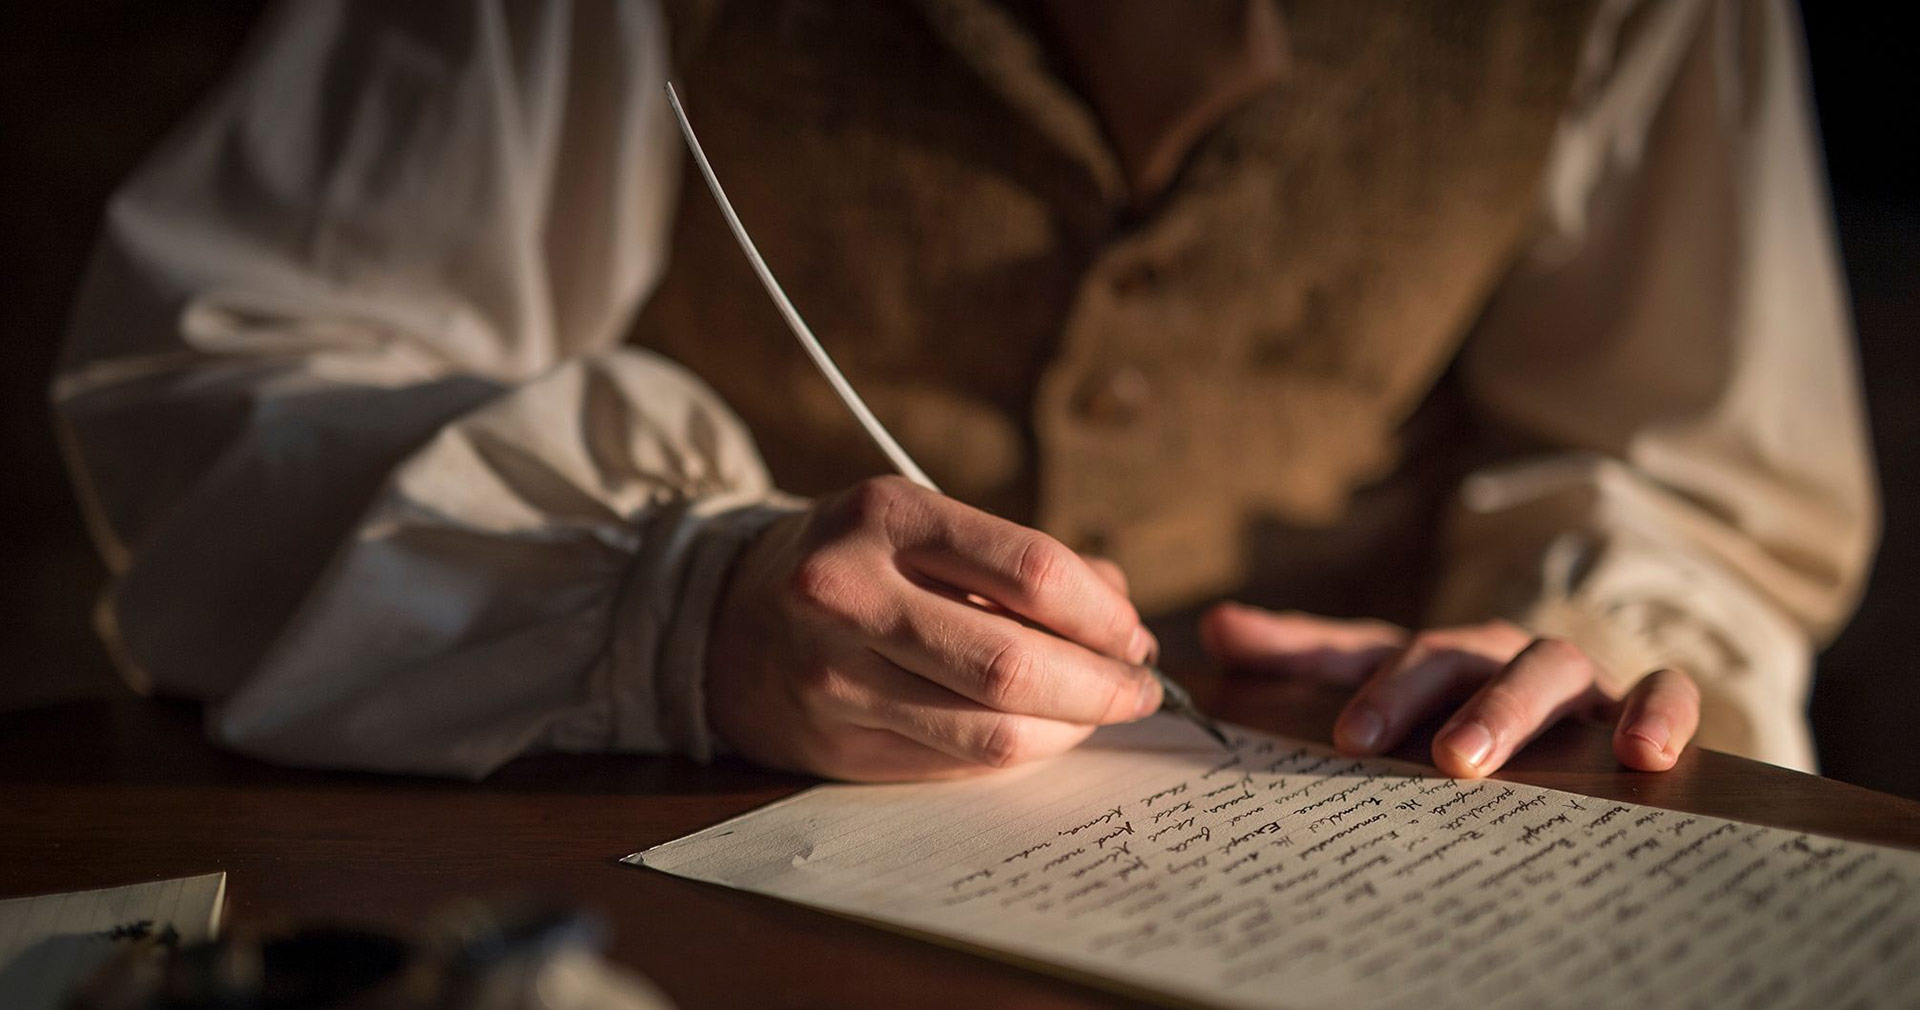 Oliver Cowdery scribing the text of the Book of Mormon. Image via Church of Jesus Christ.